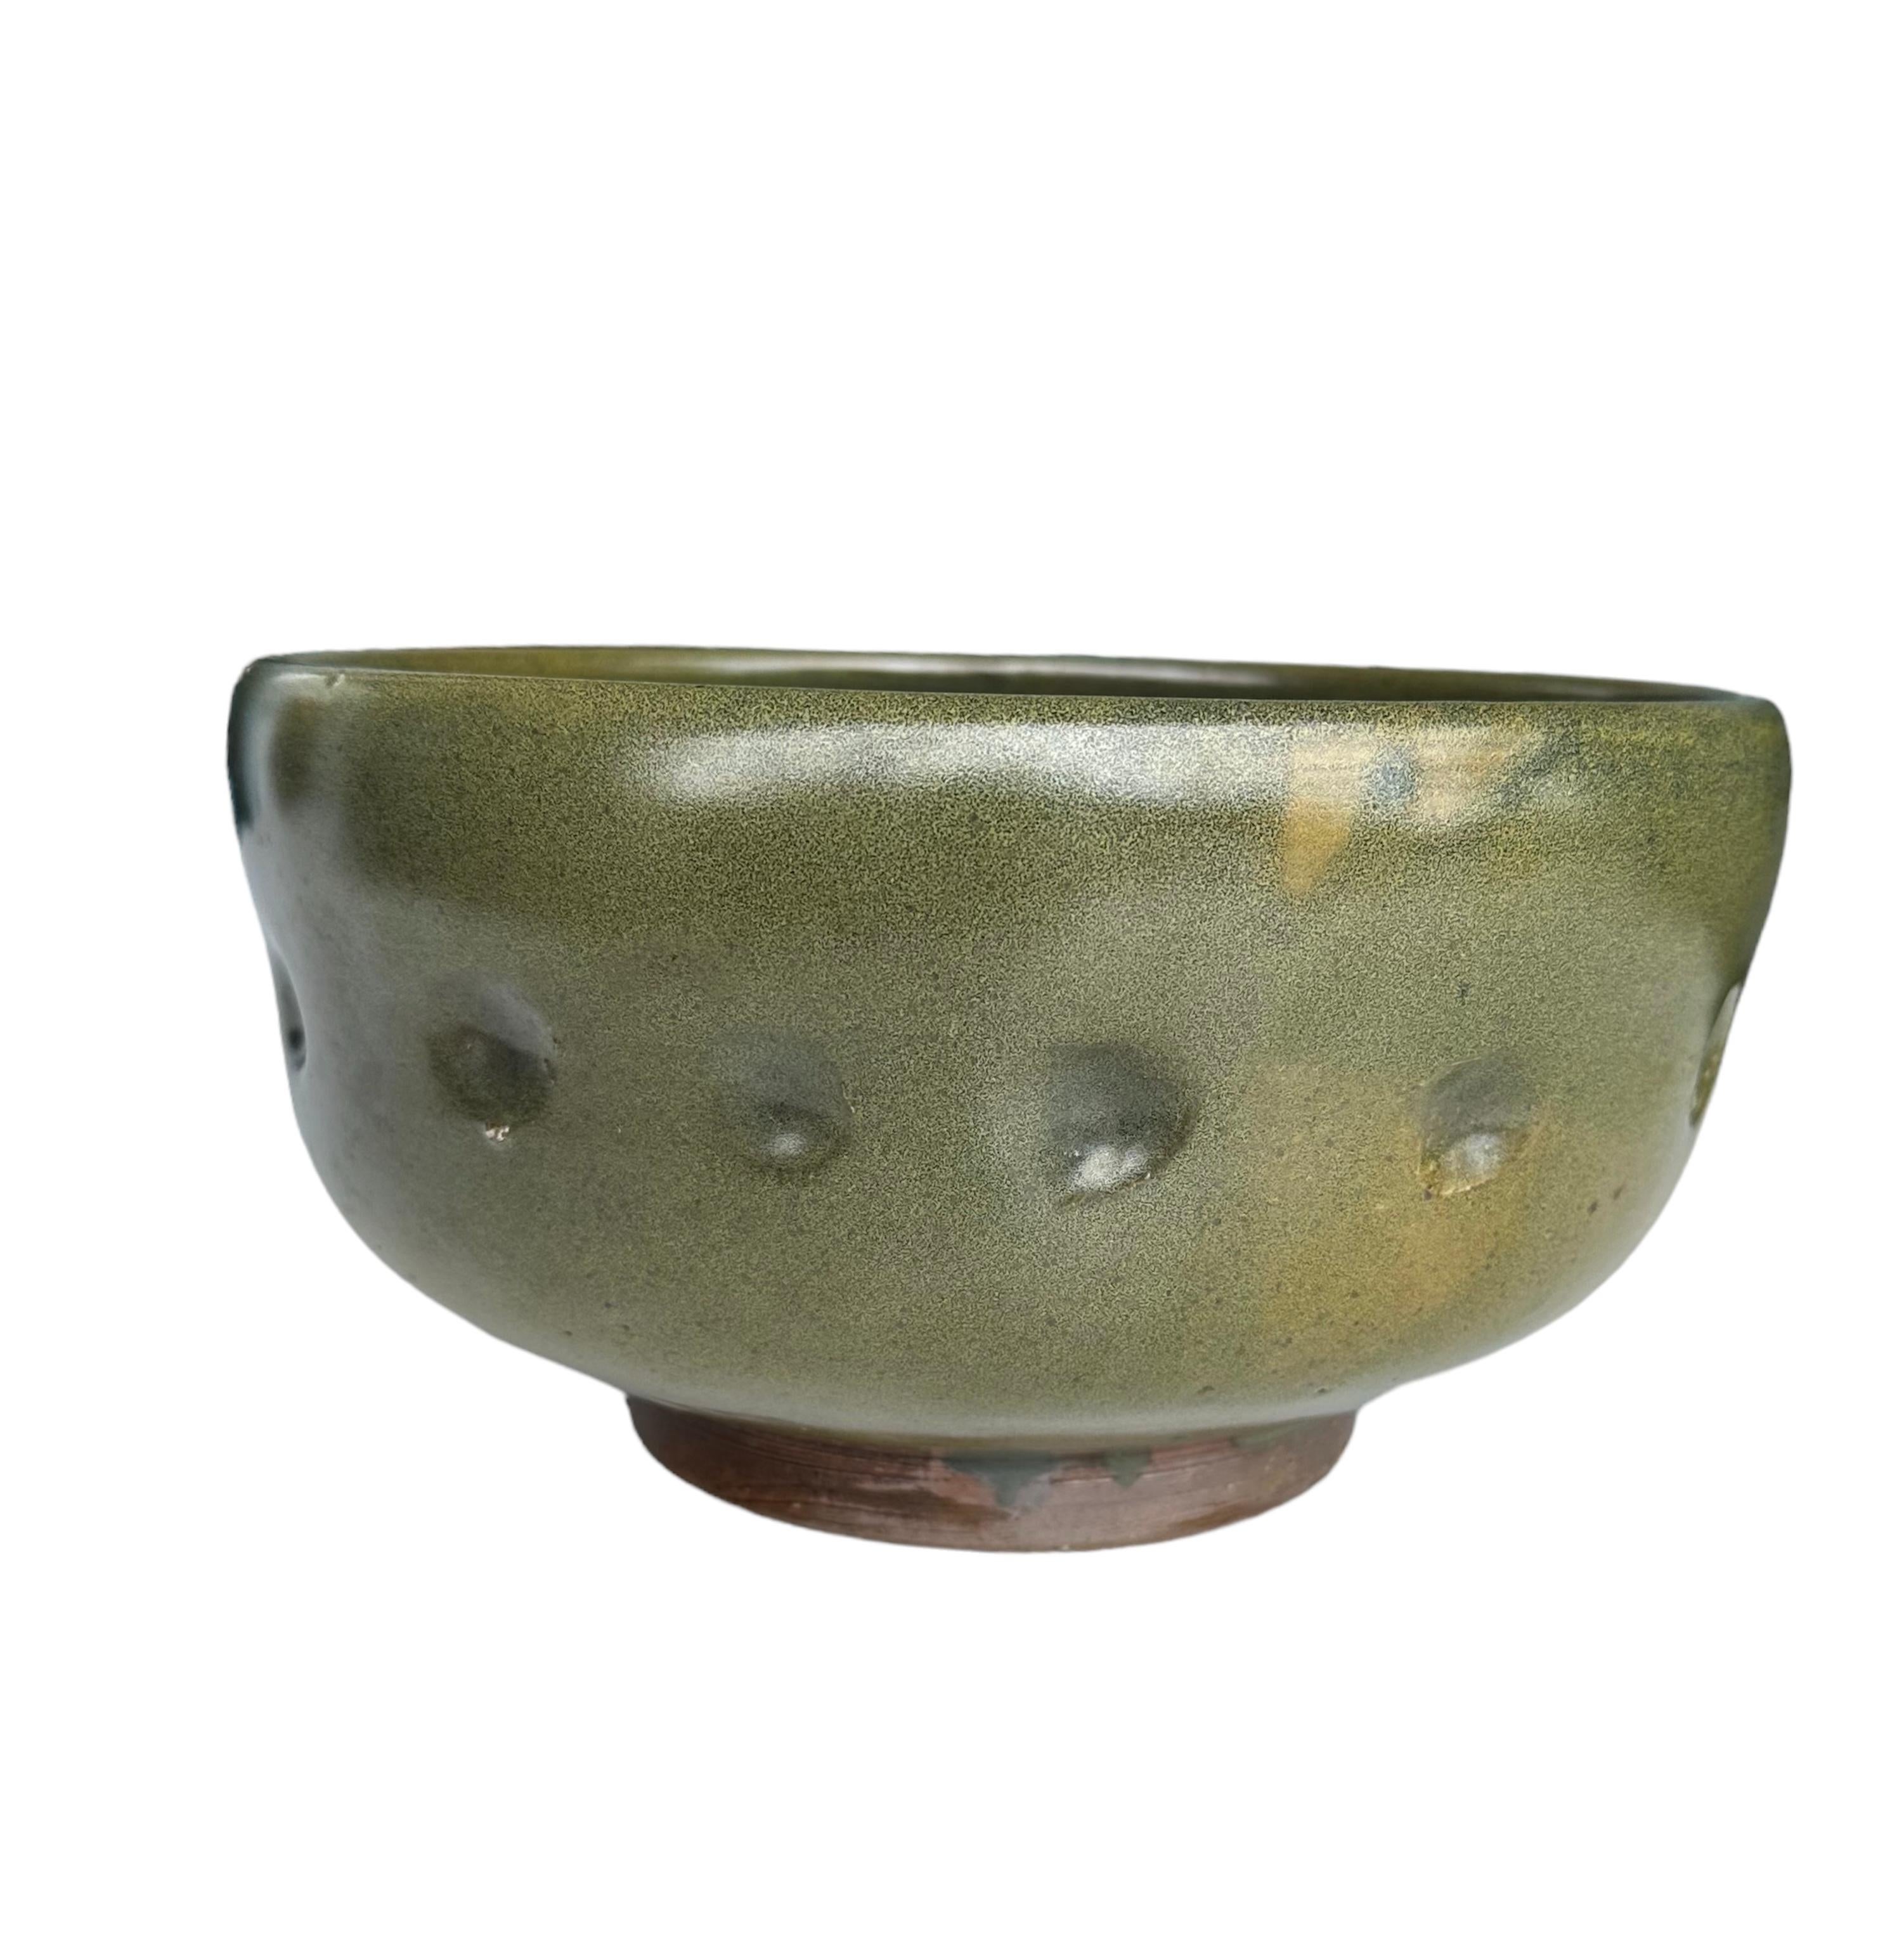 Vintage Jugtown Ware mottled semi matte green and brown glaze bowl. It was made in Seagrove, North Carolina in the 1920’s. It is marked Jugtown Ware.